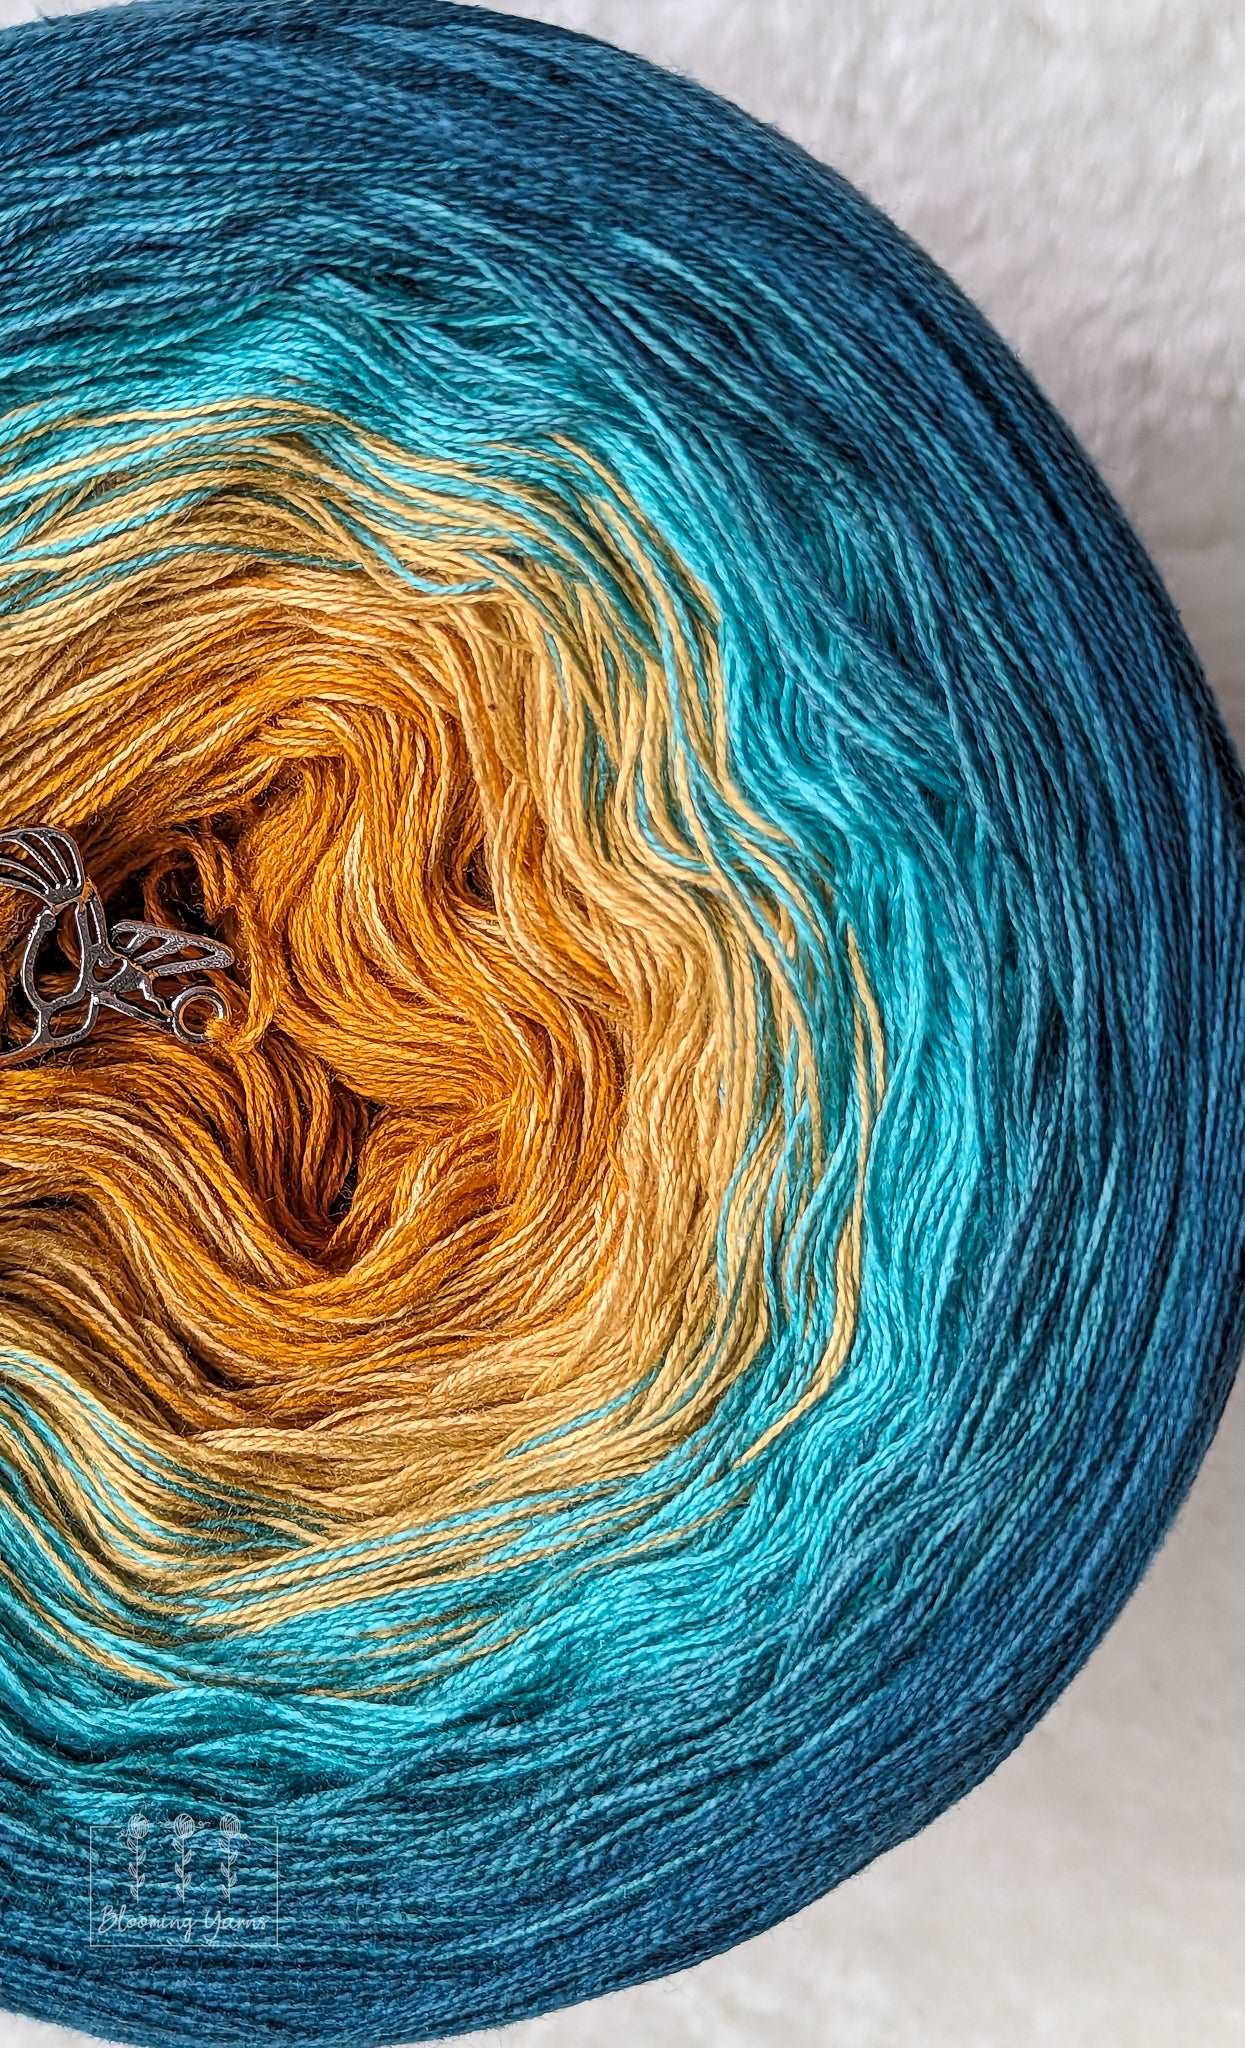 "Kingfisher" gradient ombre yarn cake created by Ancy-Fancy